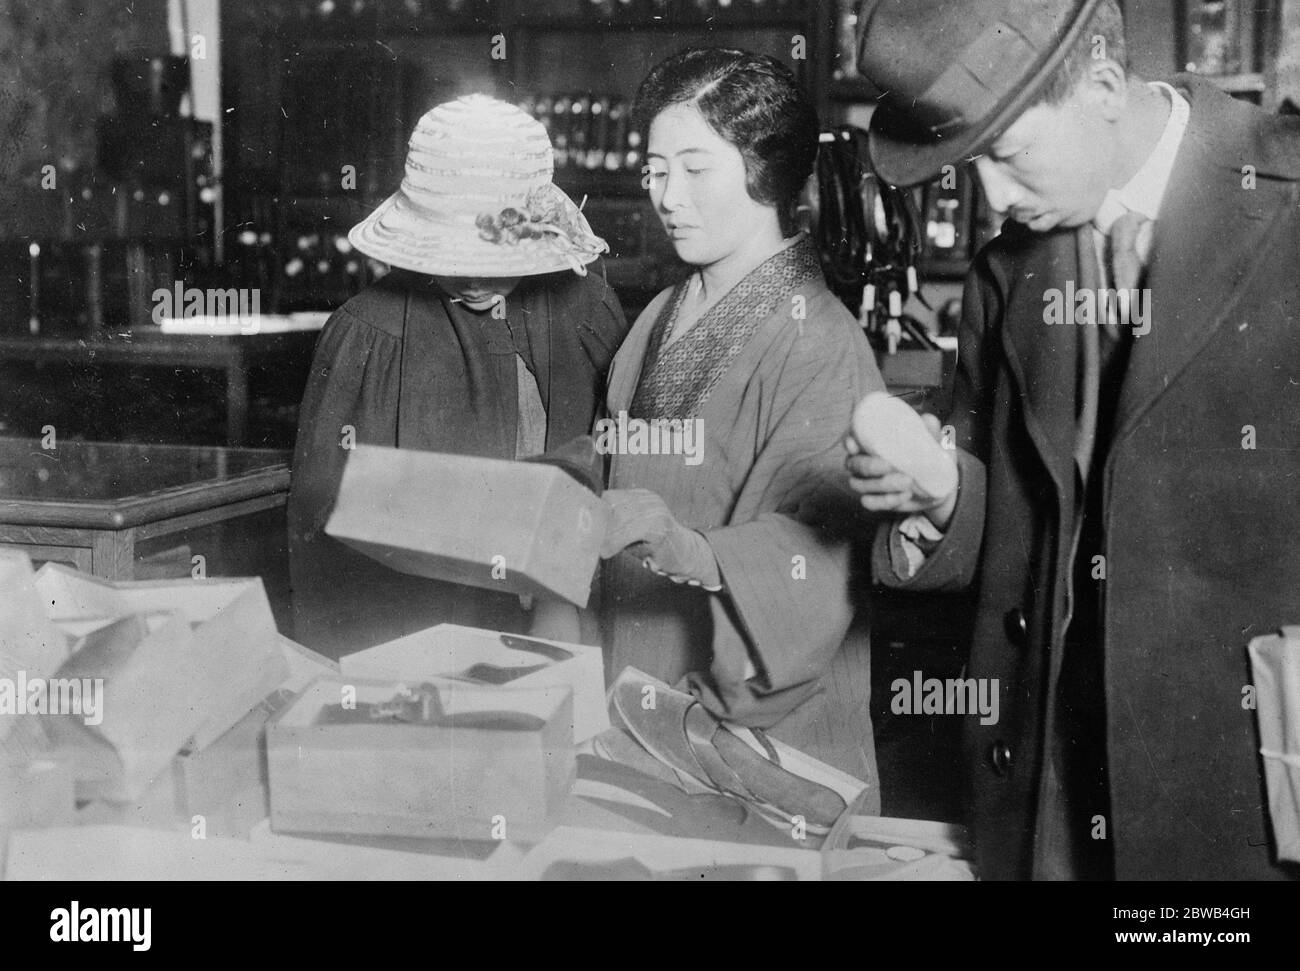 Democratic ways of a Japanese Princess . Princess Nashimoto , regarded as the most beautiful woman among the Imperial families of Japan ( centre ) shows her democratic tendencies by frequent shopping tours in Tokyo . 14 May 1924 Stock Photo